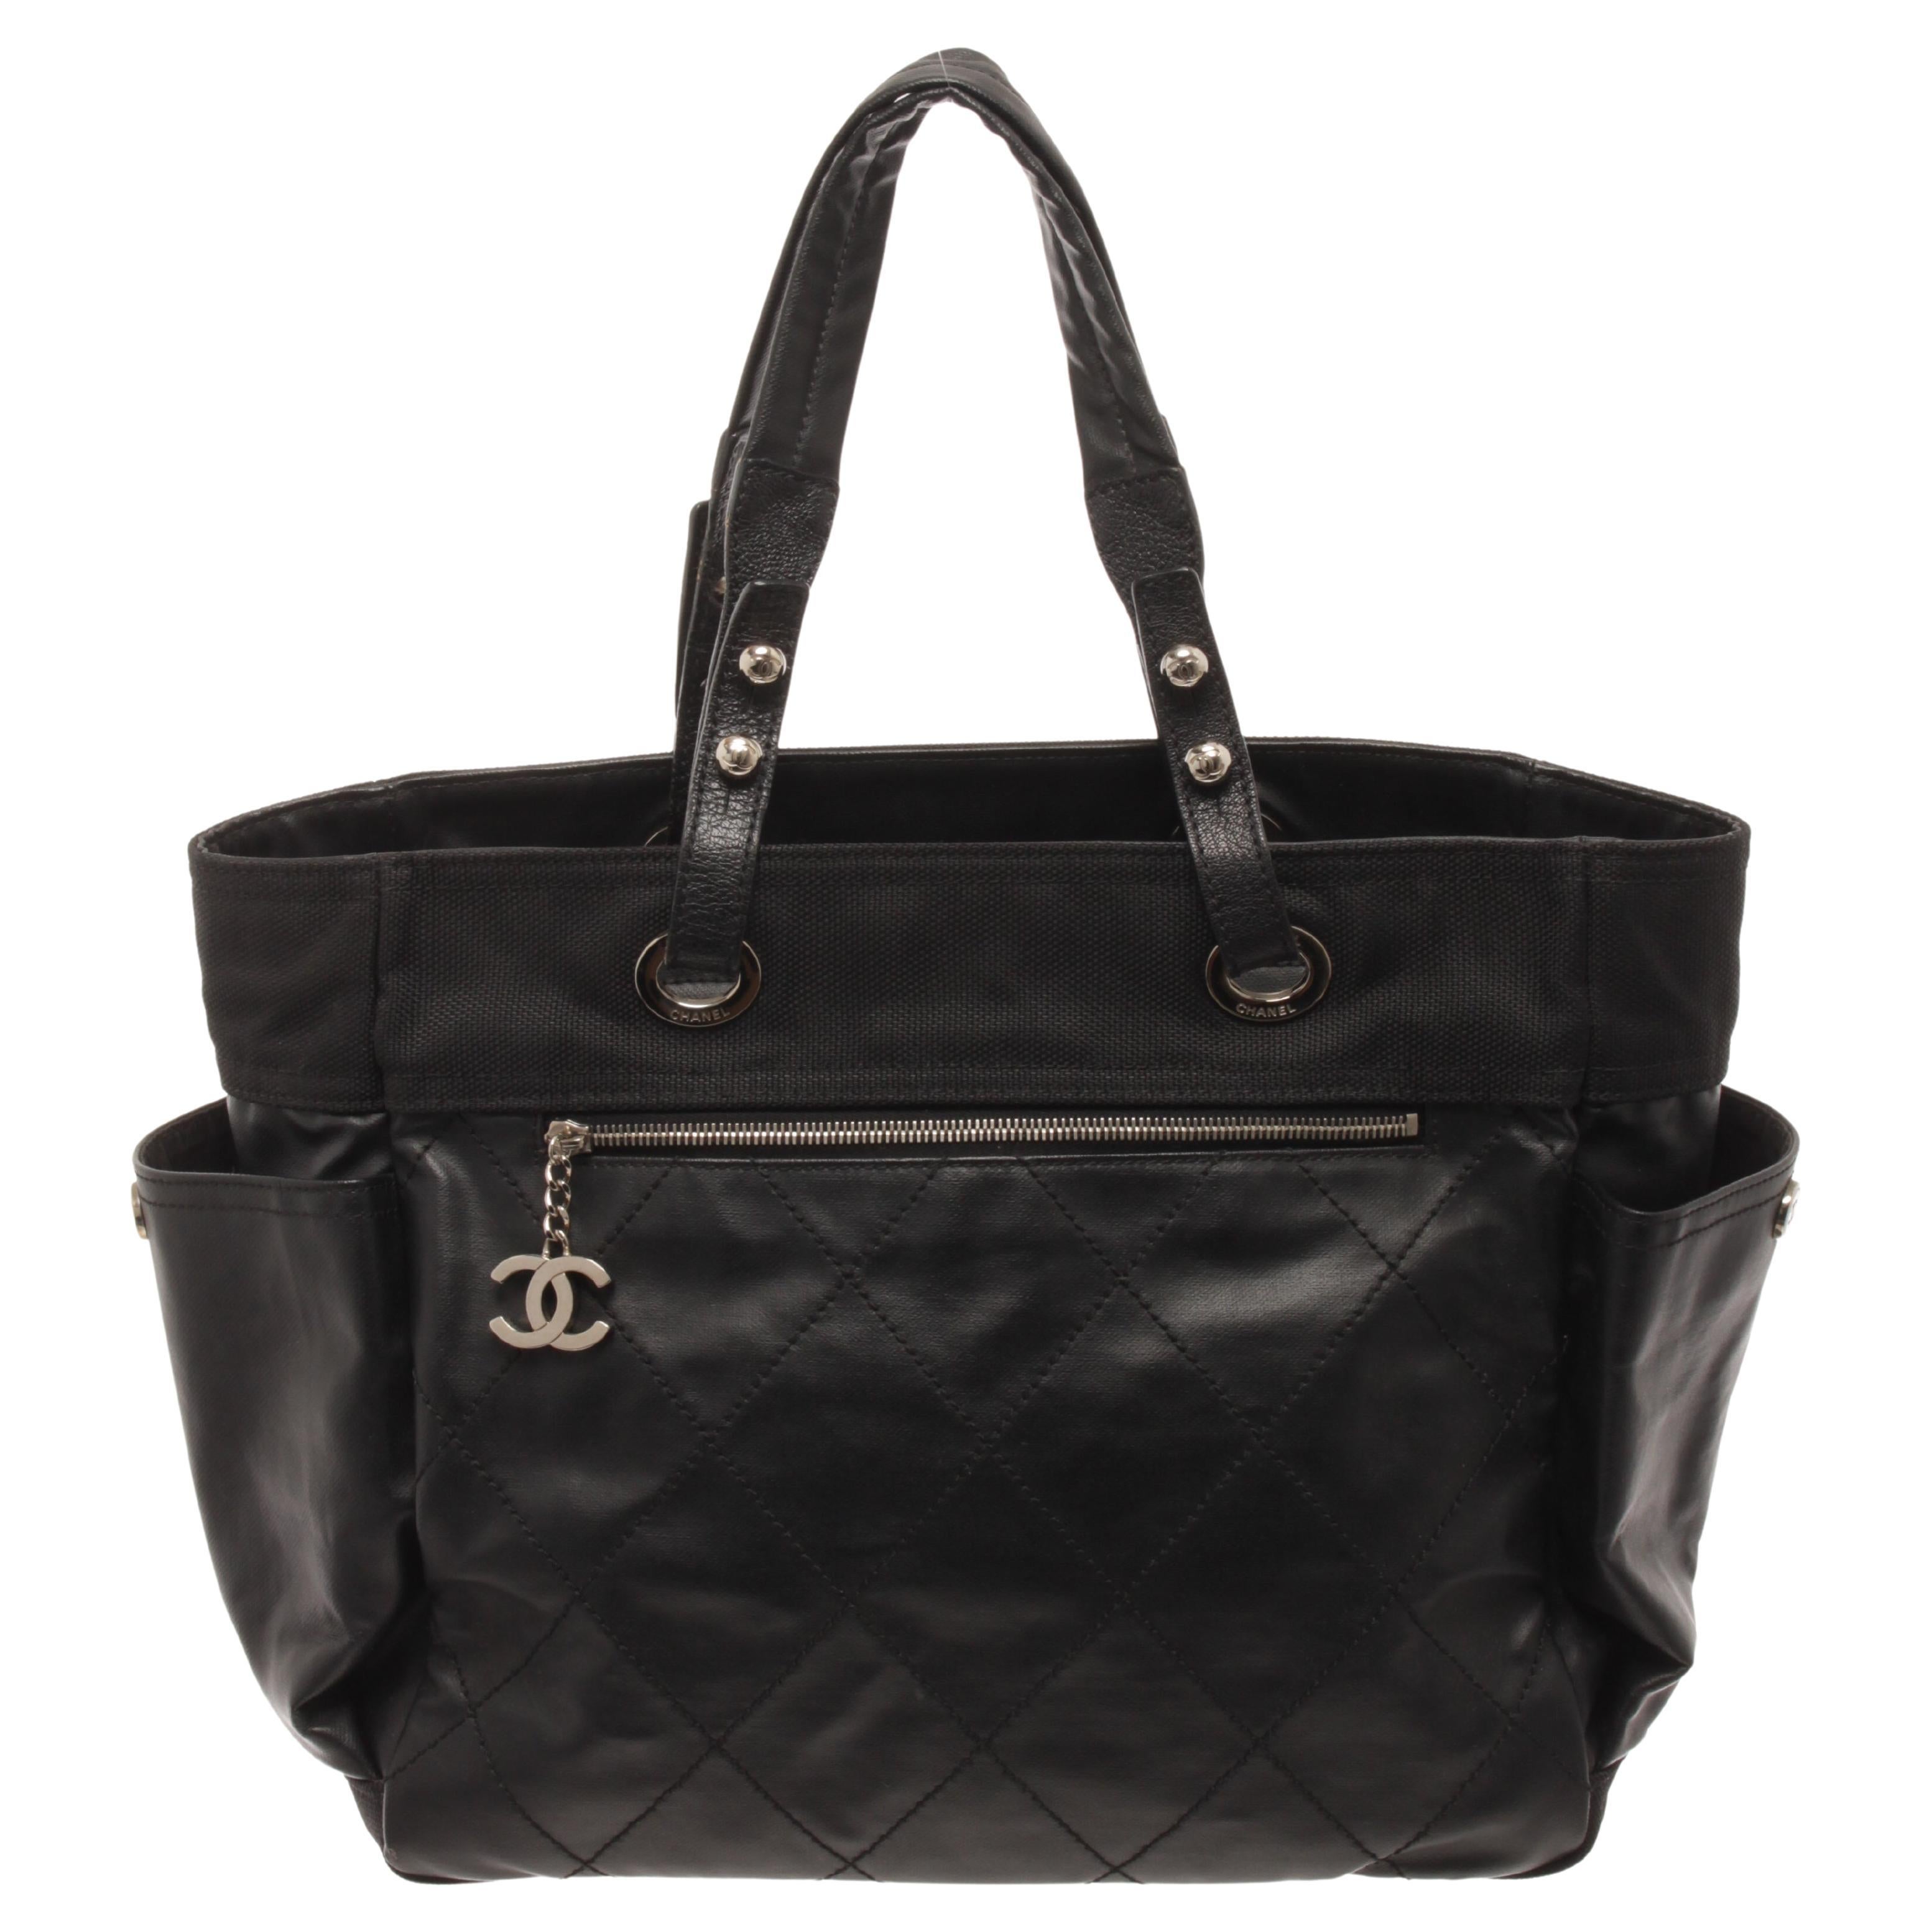 Chanel Black Quilted Coated Canvas Biarritz Tote Bag